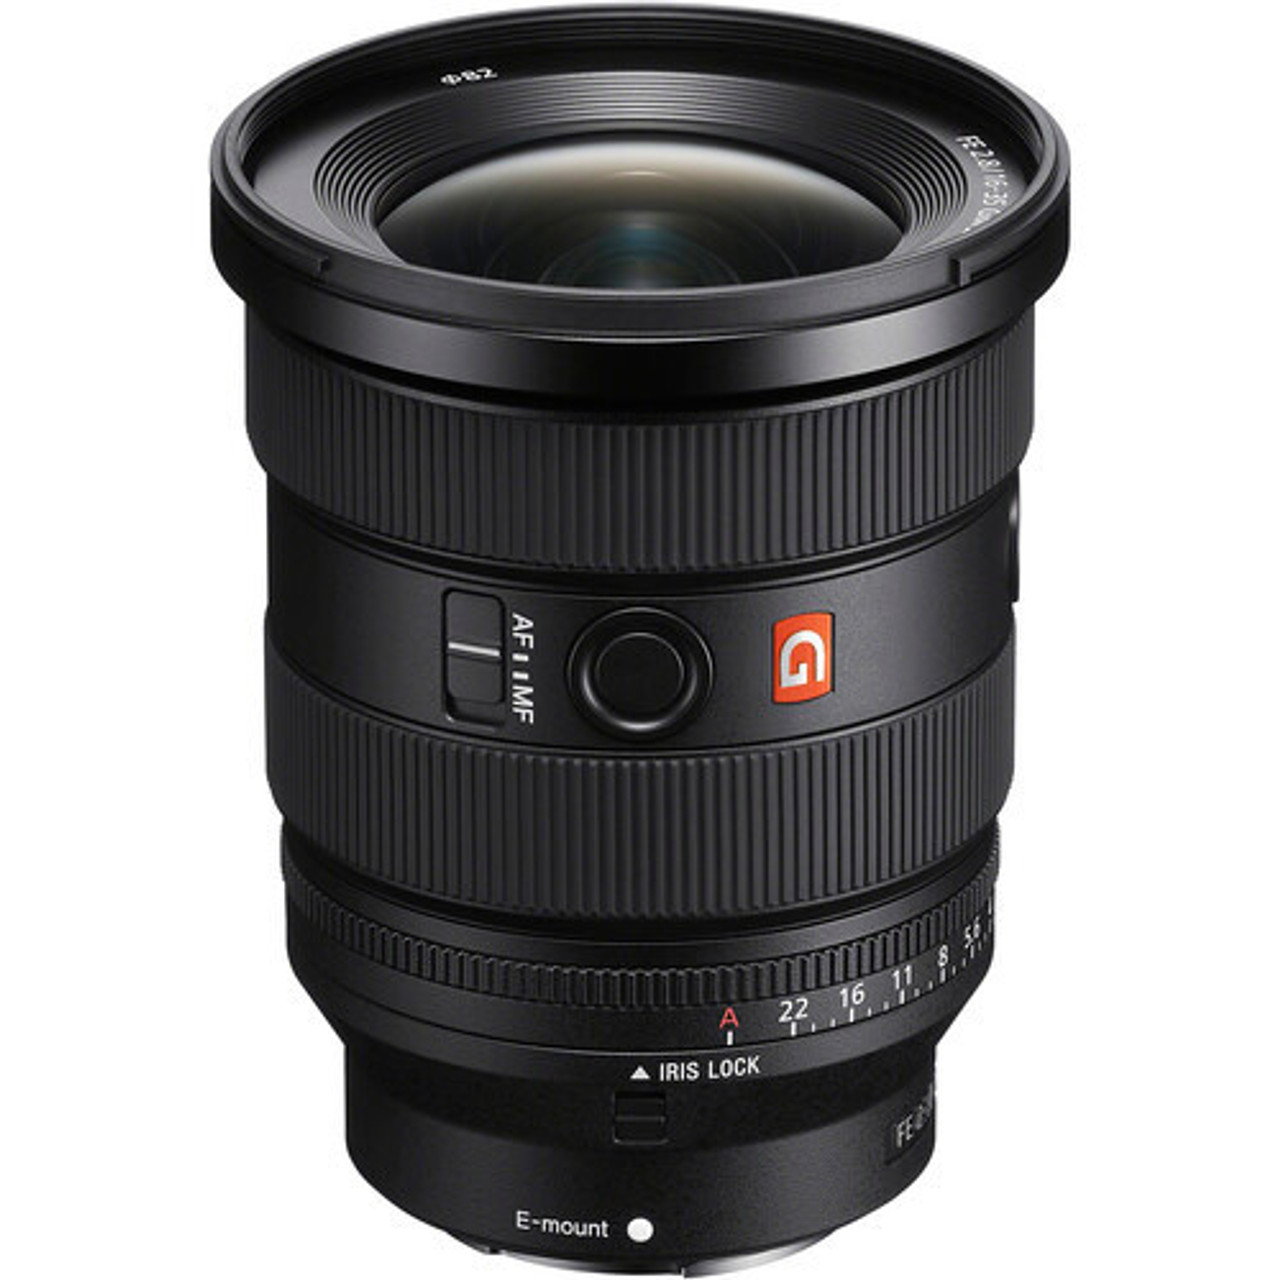 Sony FE 35mm f/1.8: Every Sony Photographer Should Own This Lens